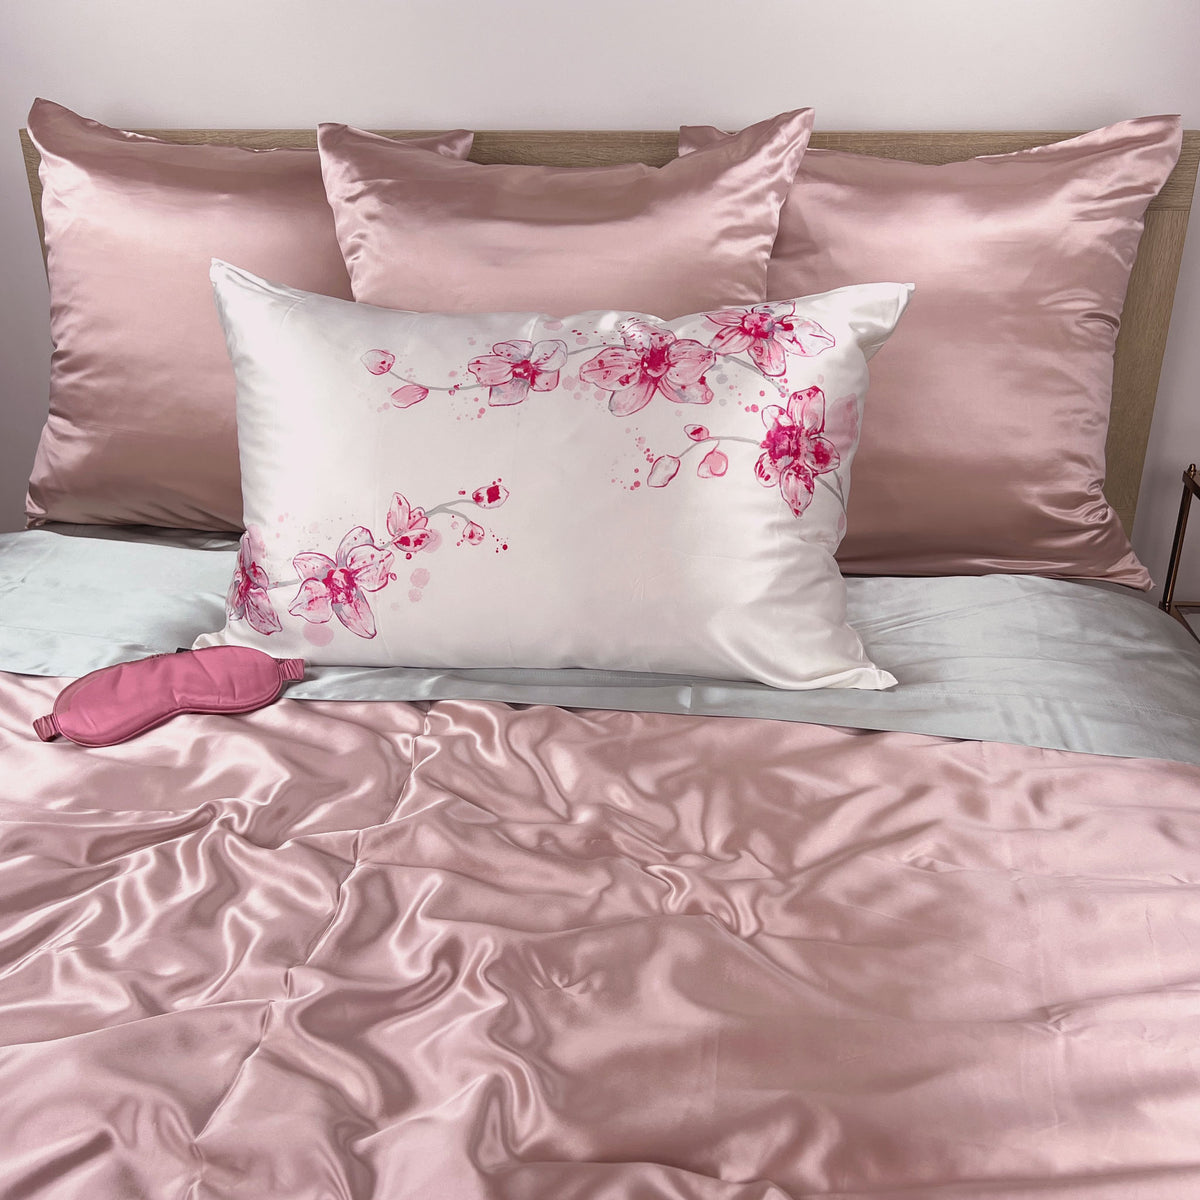 Gallery Collection Silk Pillowcases - Pink Orchids